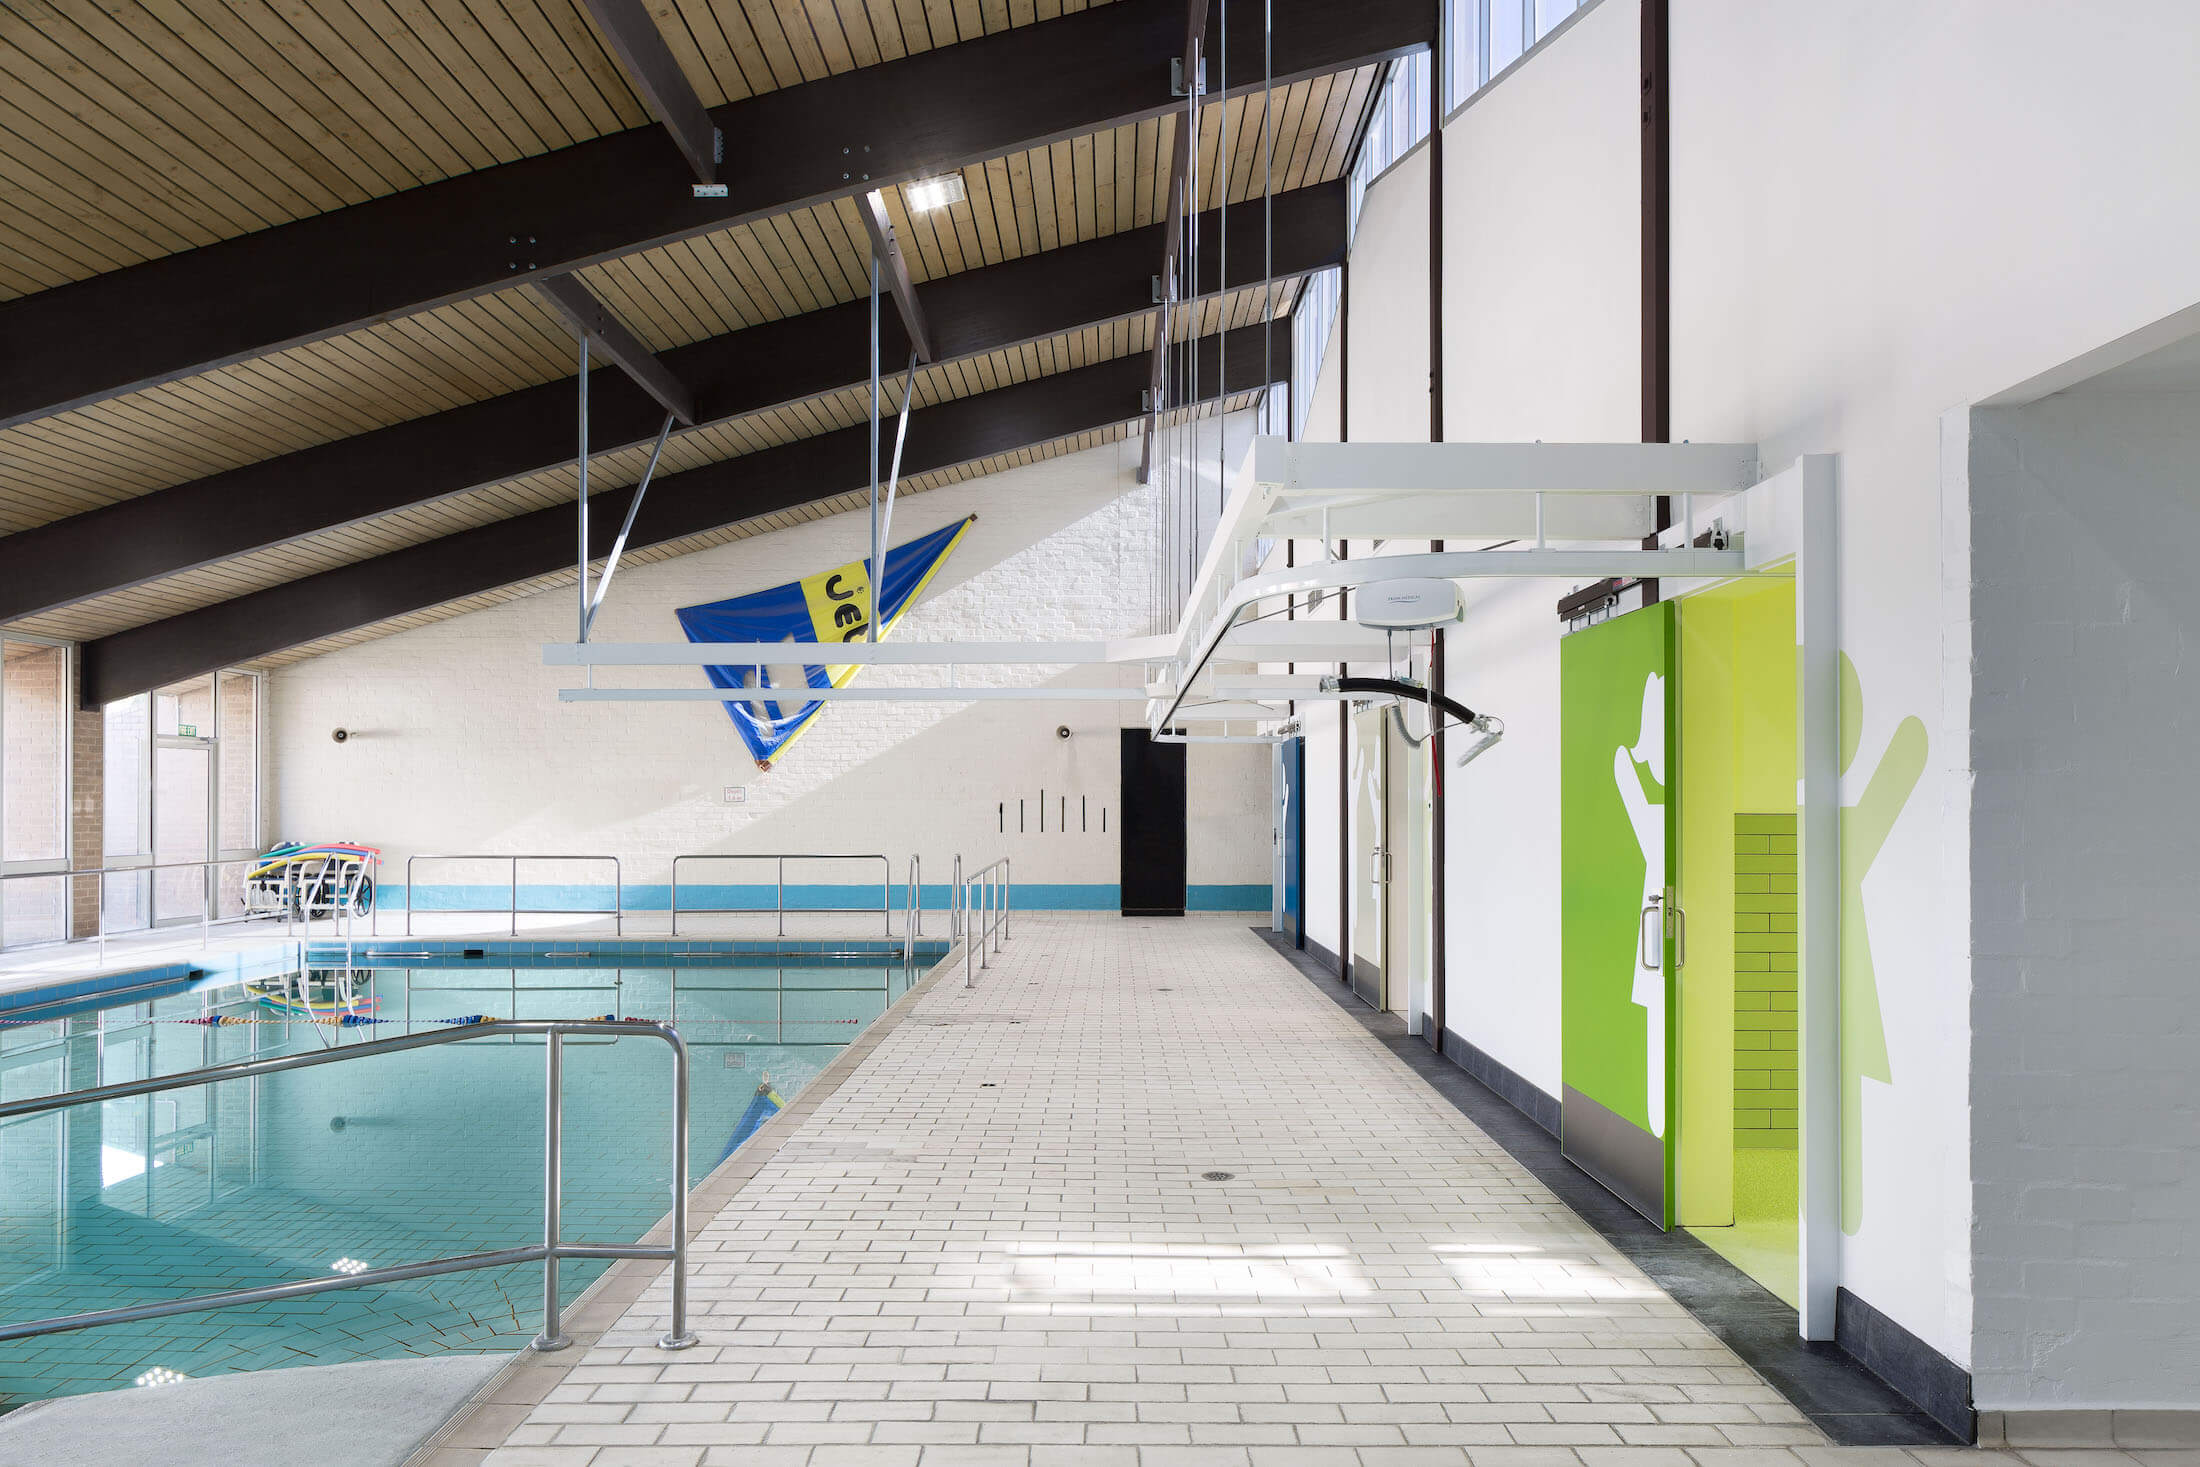 School pool area with colour coded toilet blocks and hoist tracks over pool